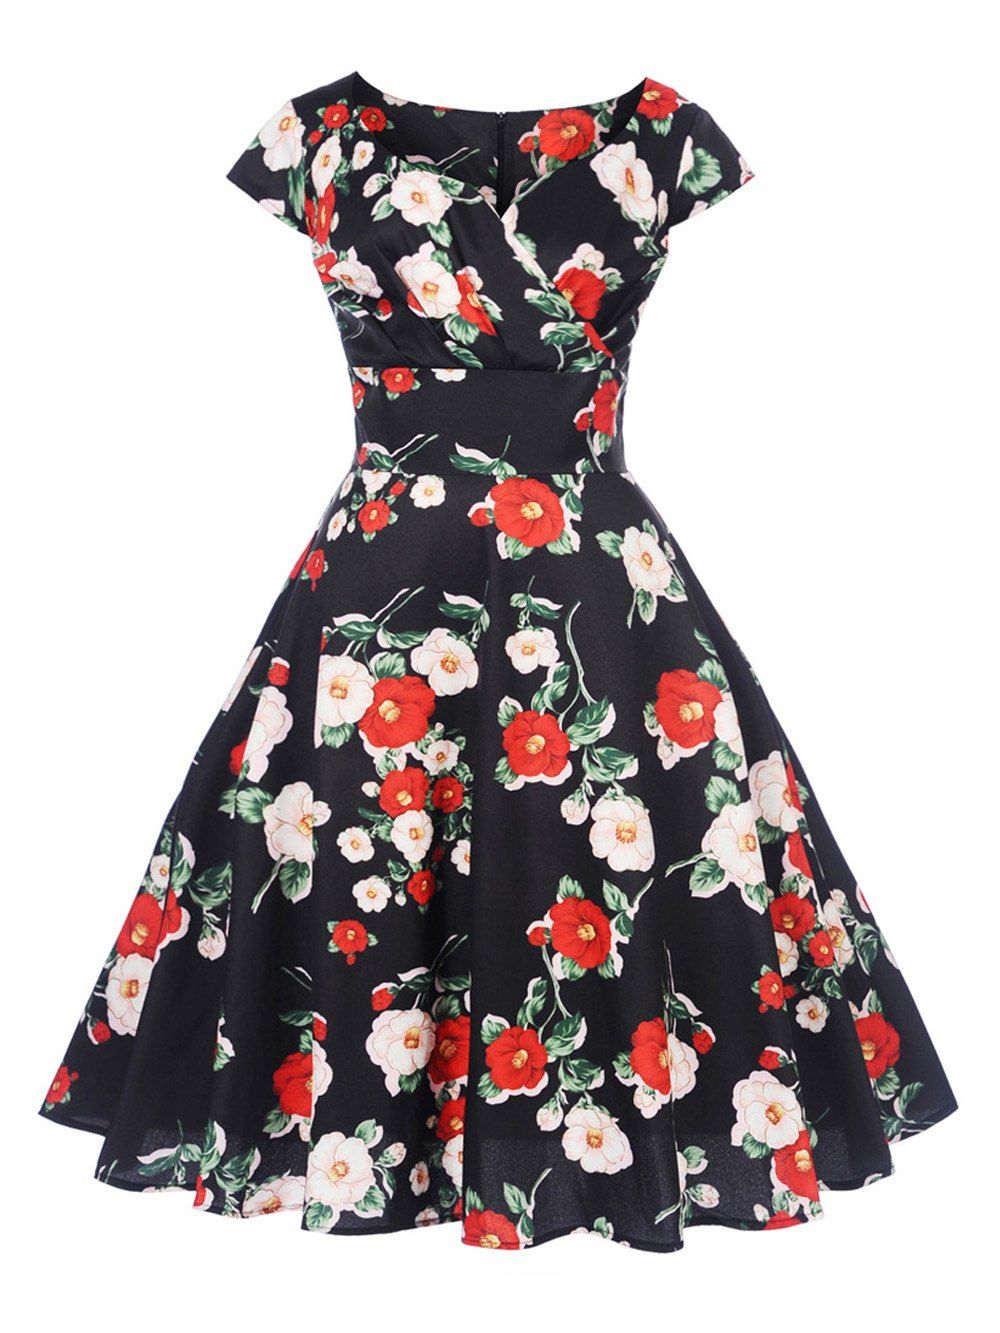 Women's Vintage 50s 60s retro Rockabilly Pinup Housewife Party Swing Dress